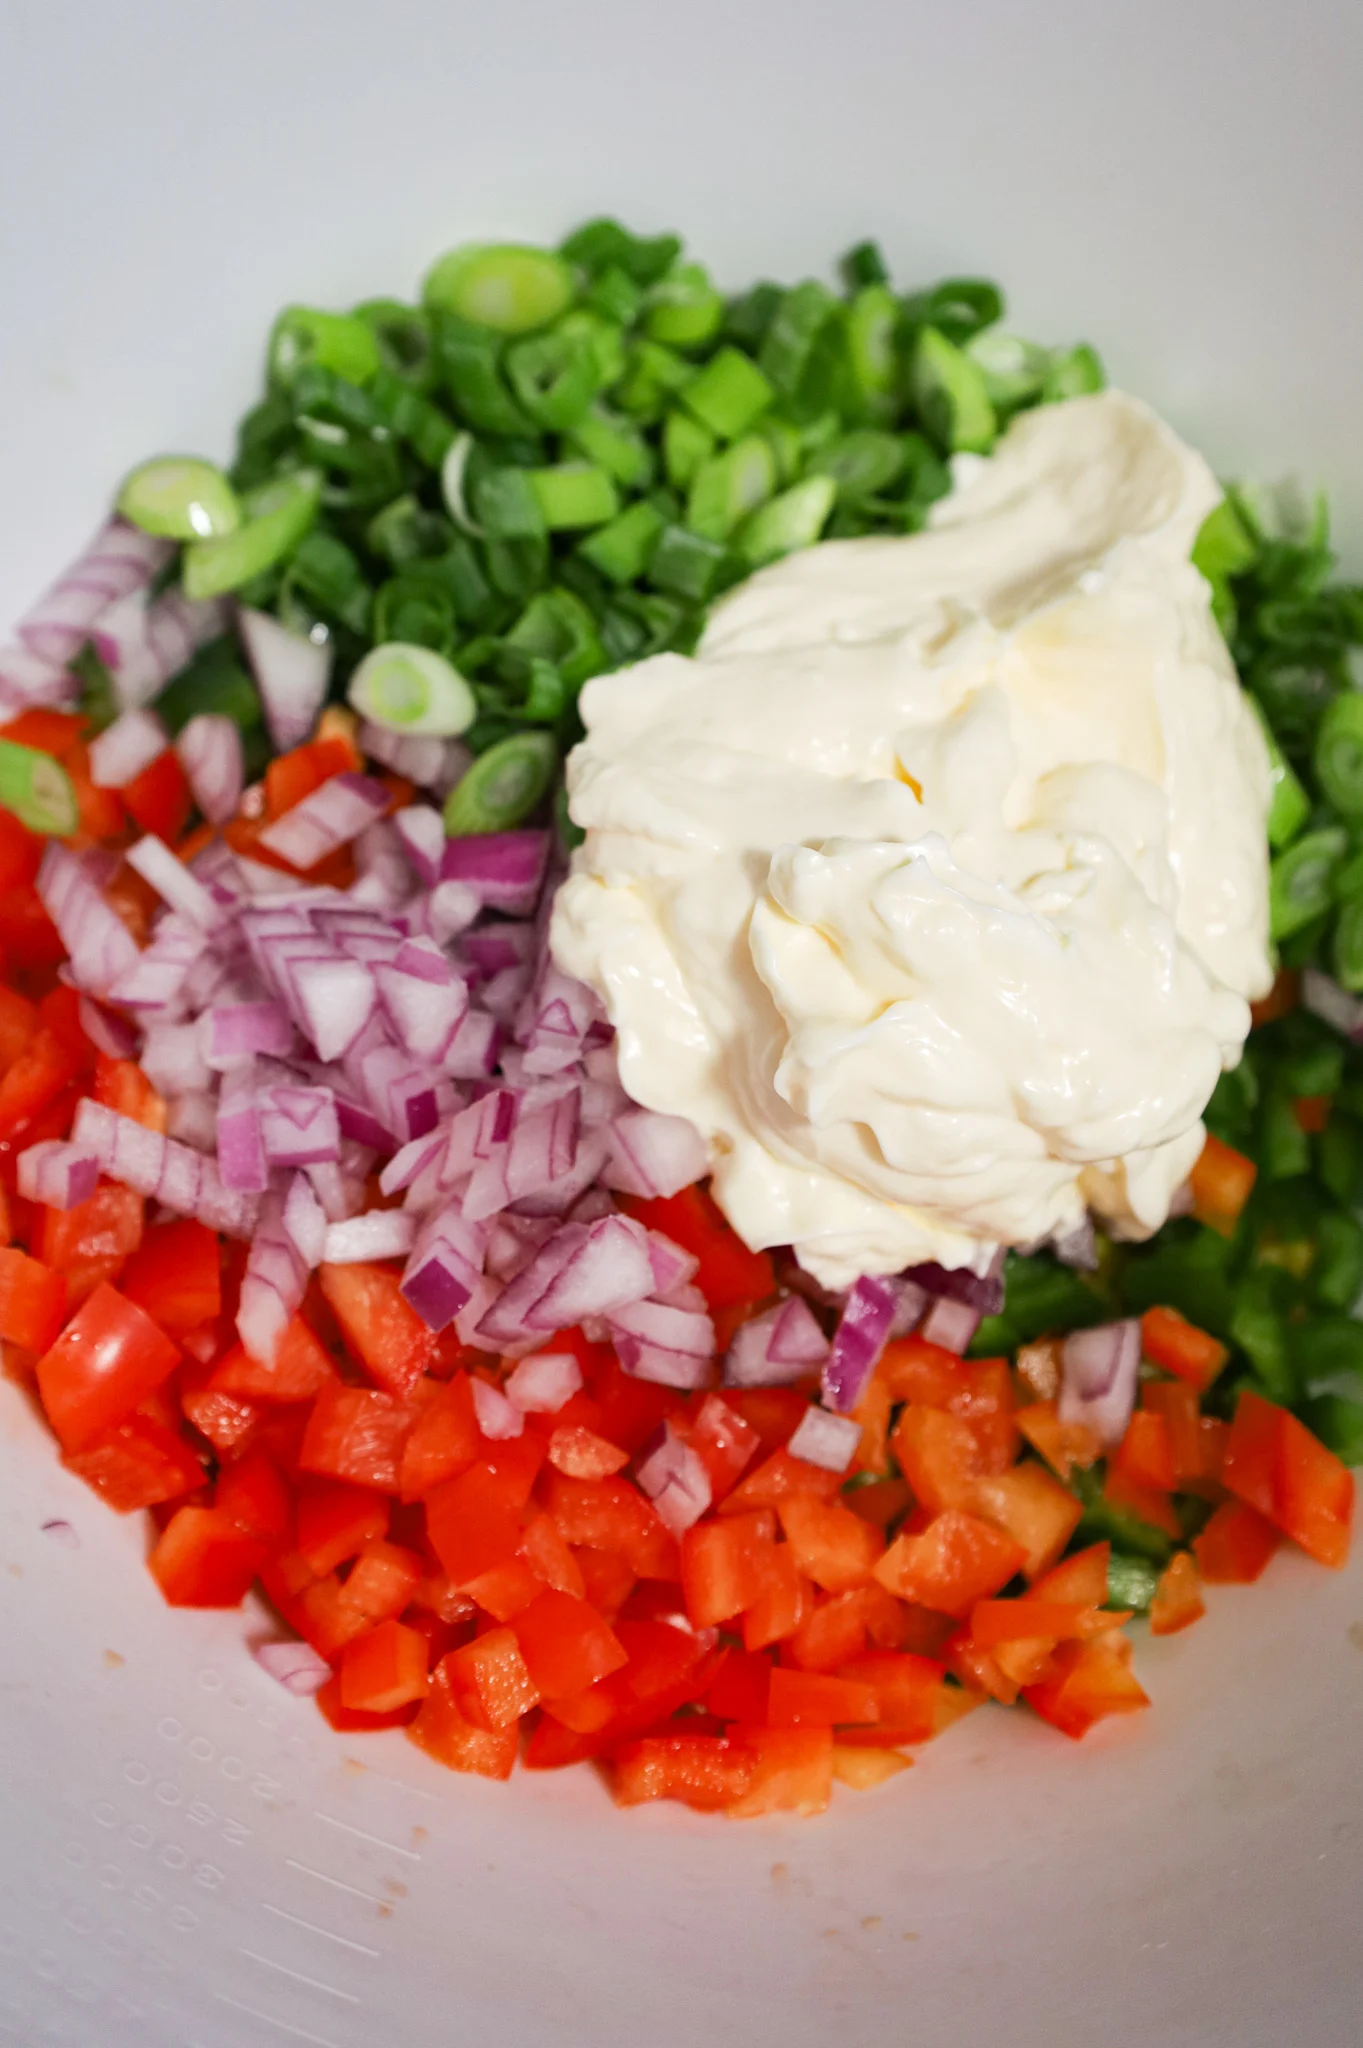 mayo on top of diced veggies in a mixing bowl